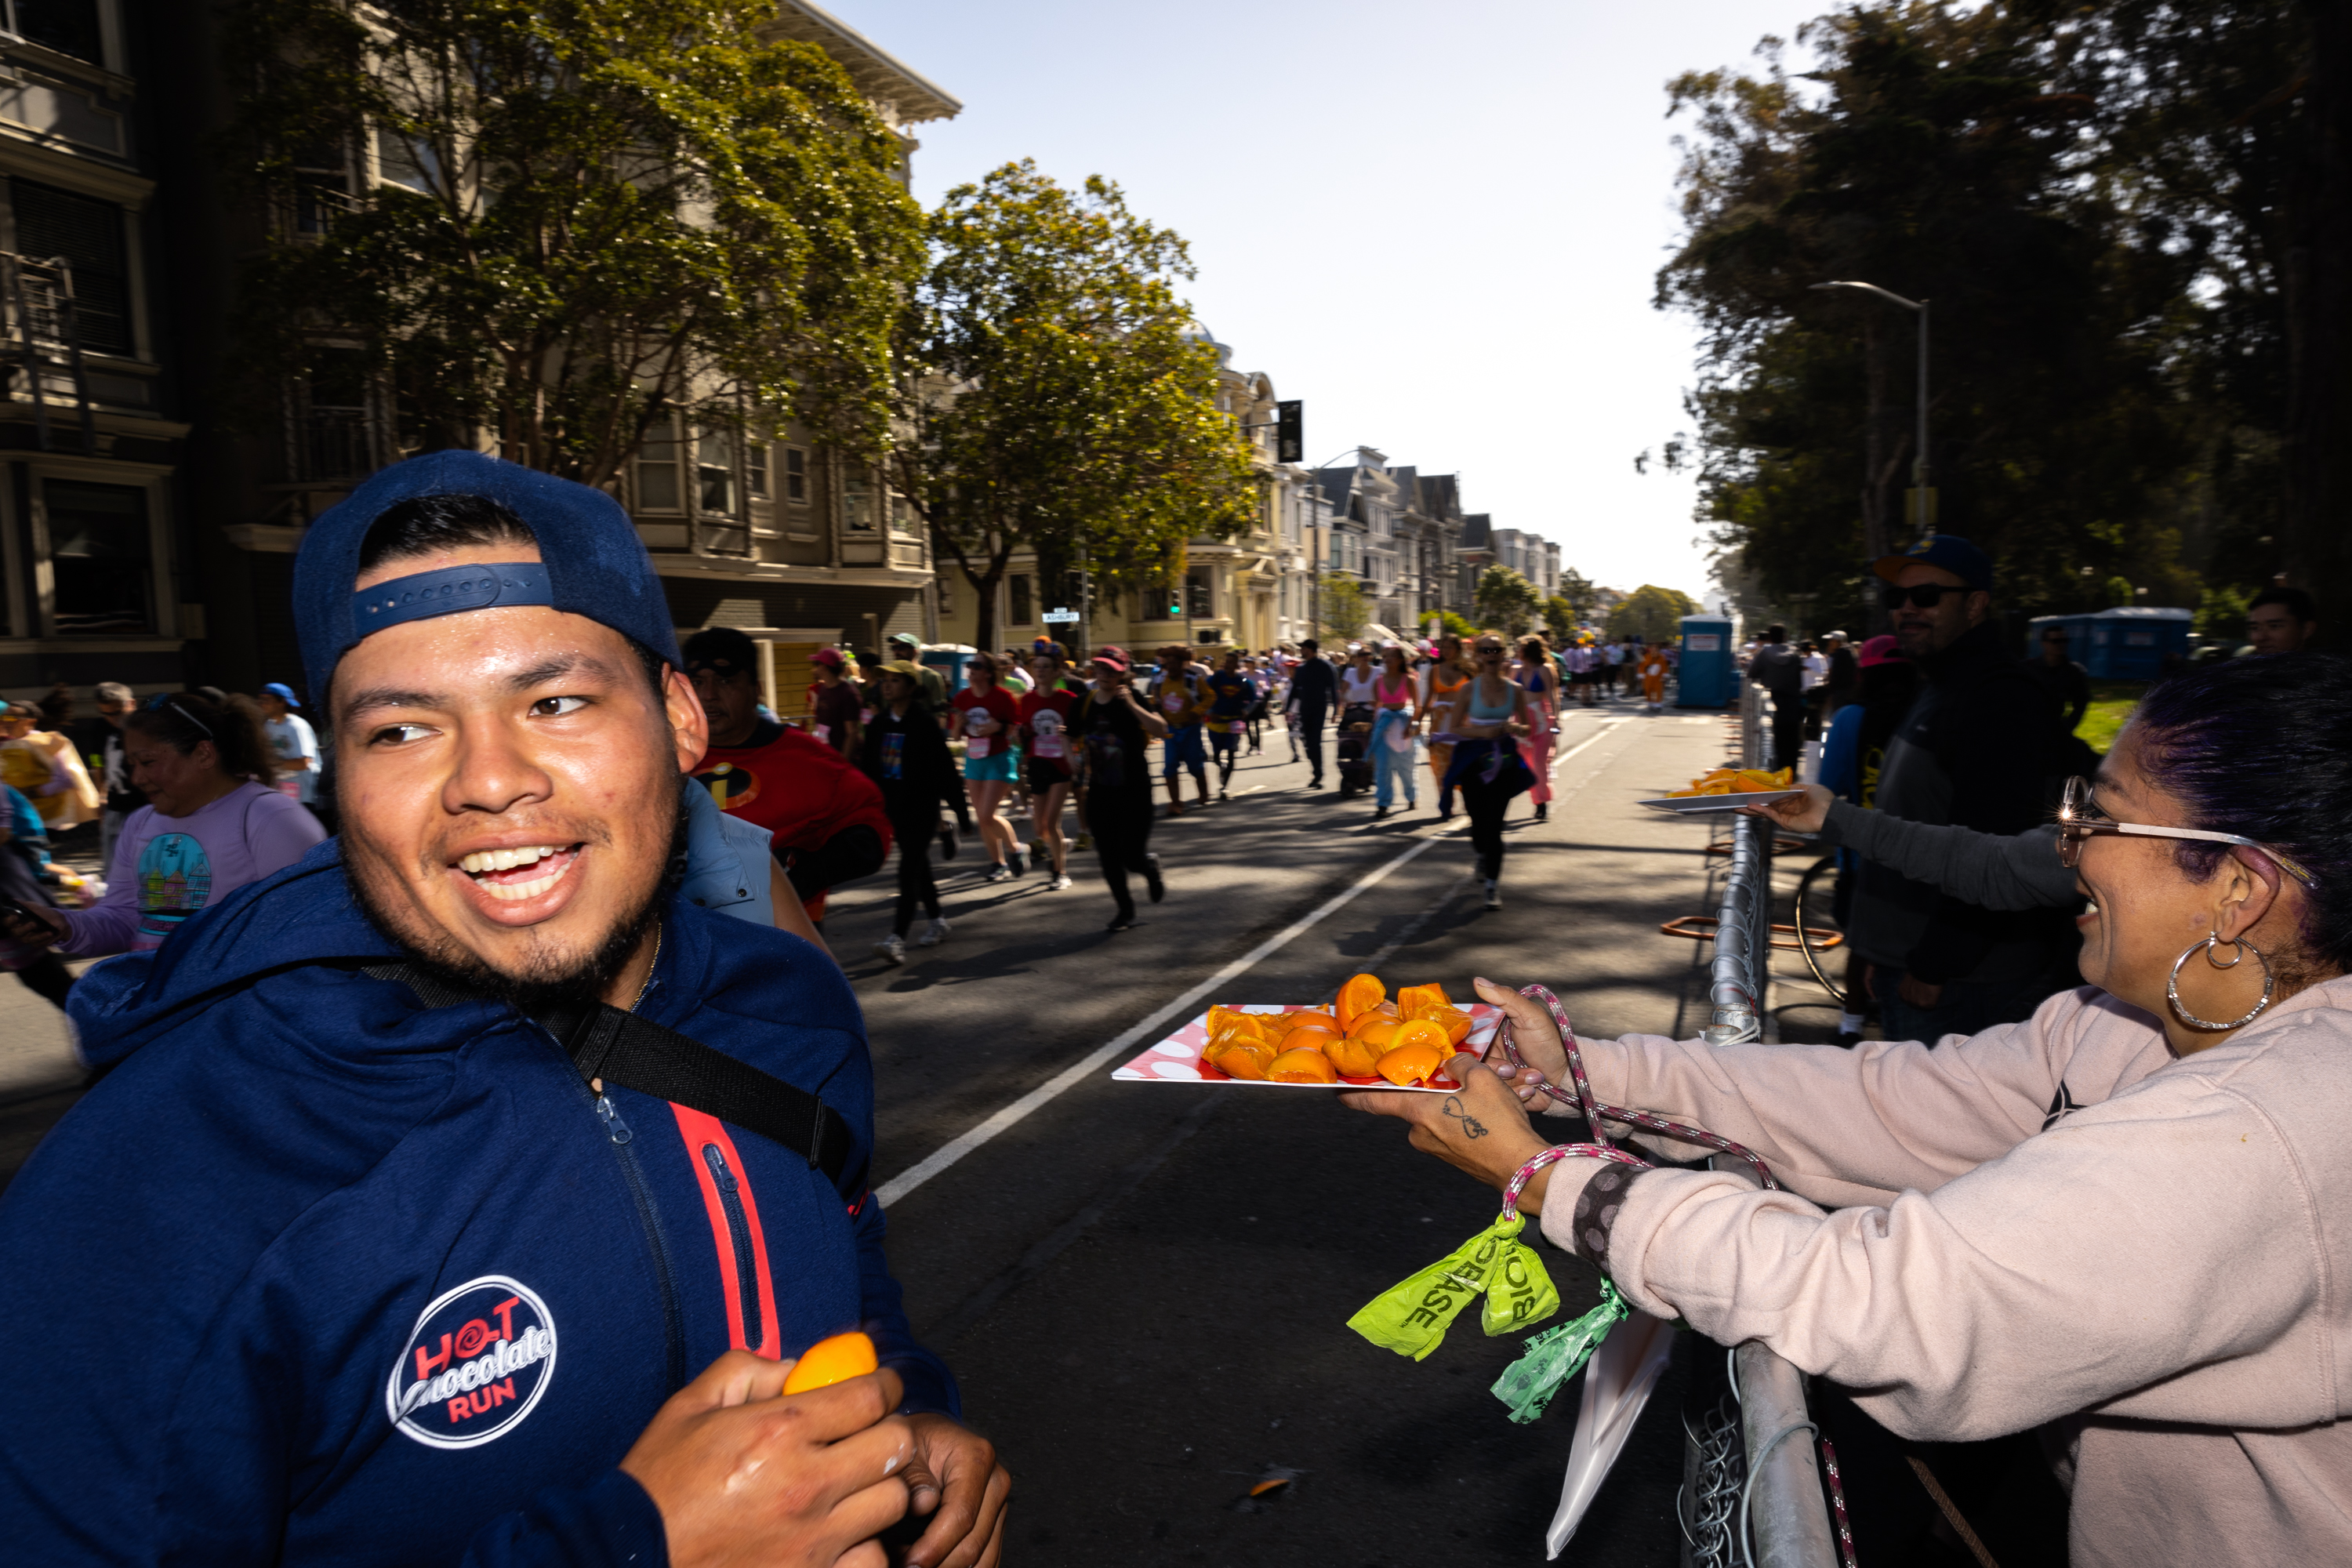 A smiling man in a blue cap receives orange slices from a woman at a lively street marathon lined with spectators and participants.